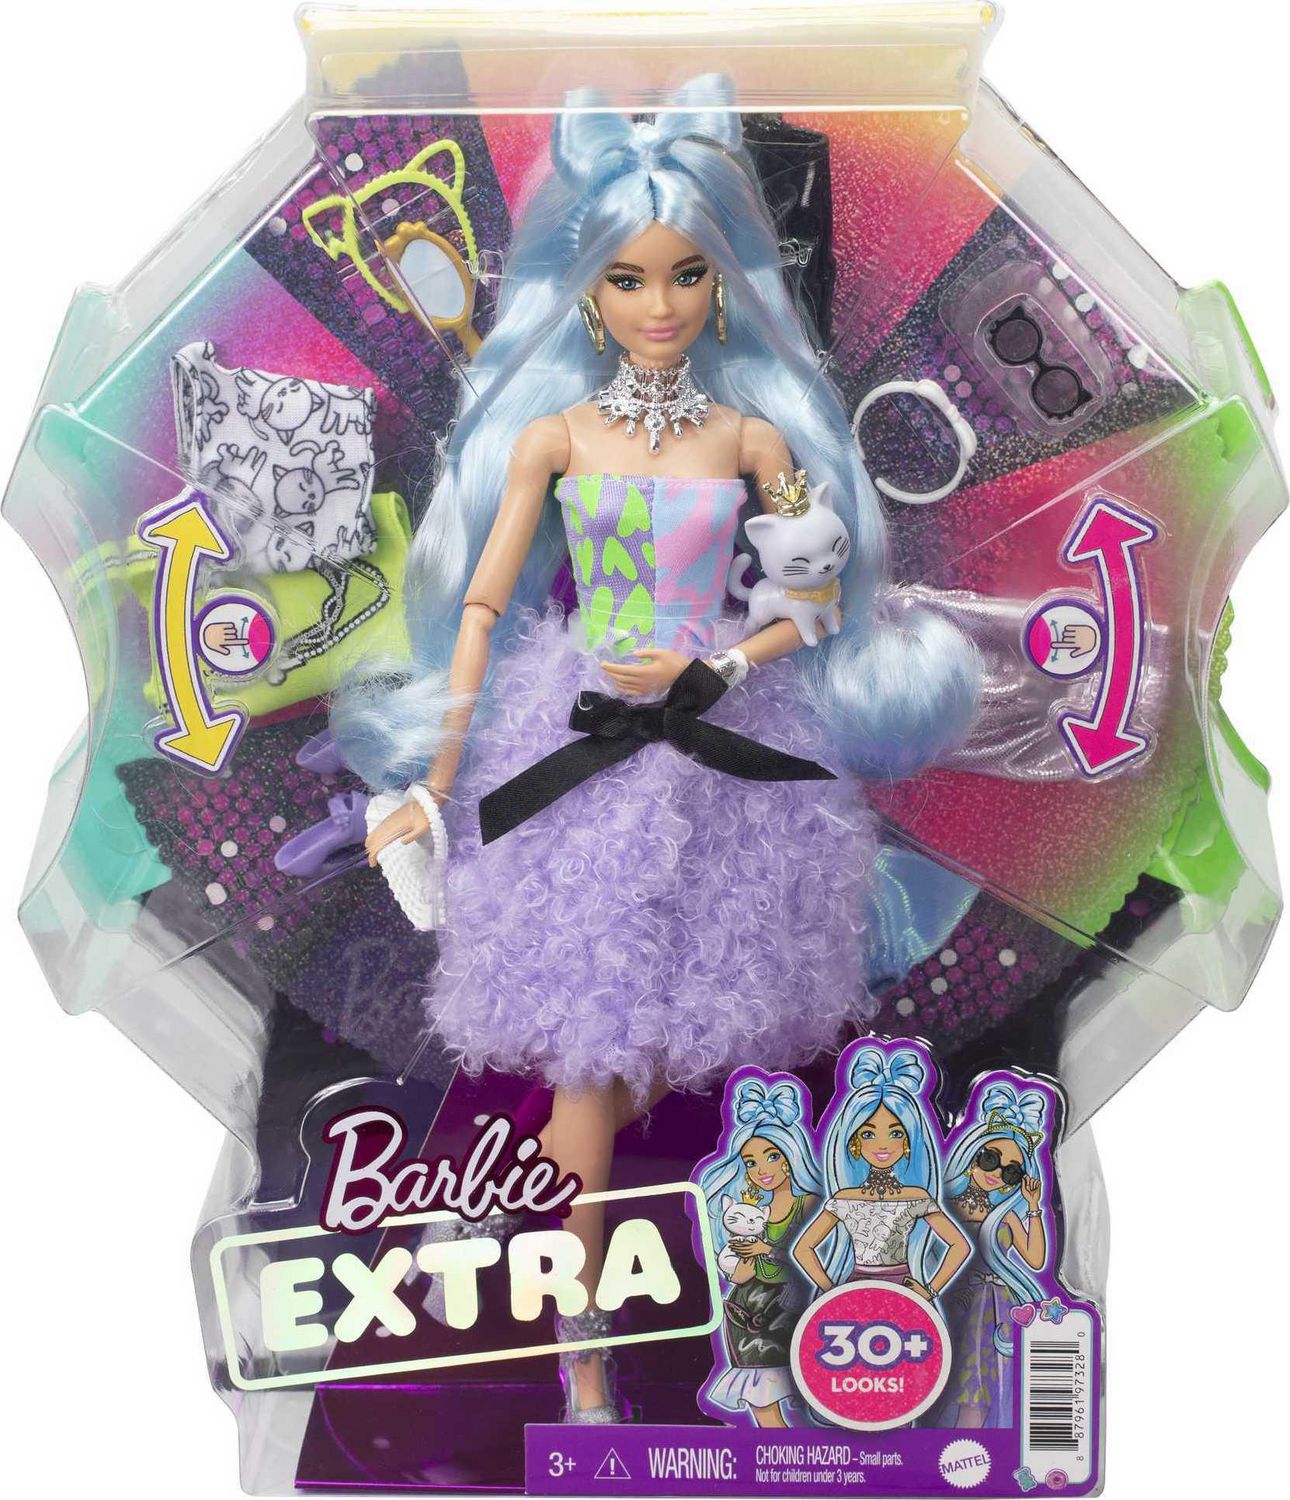 Barbie Extra Doll & Accessories Set with Mix & Match Pieces for 30